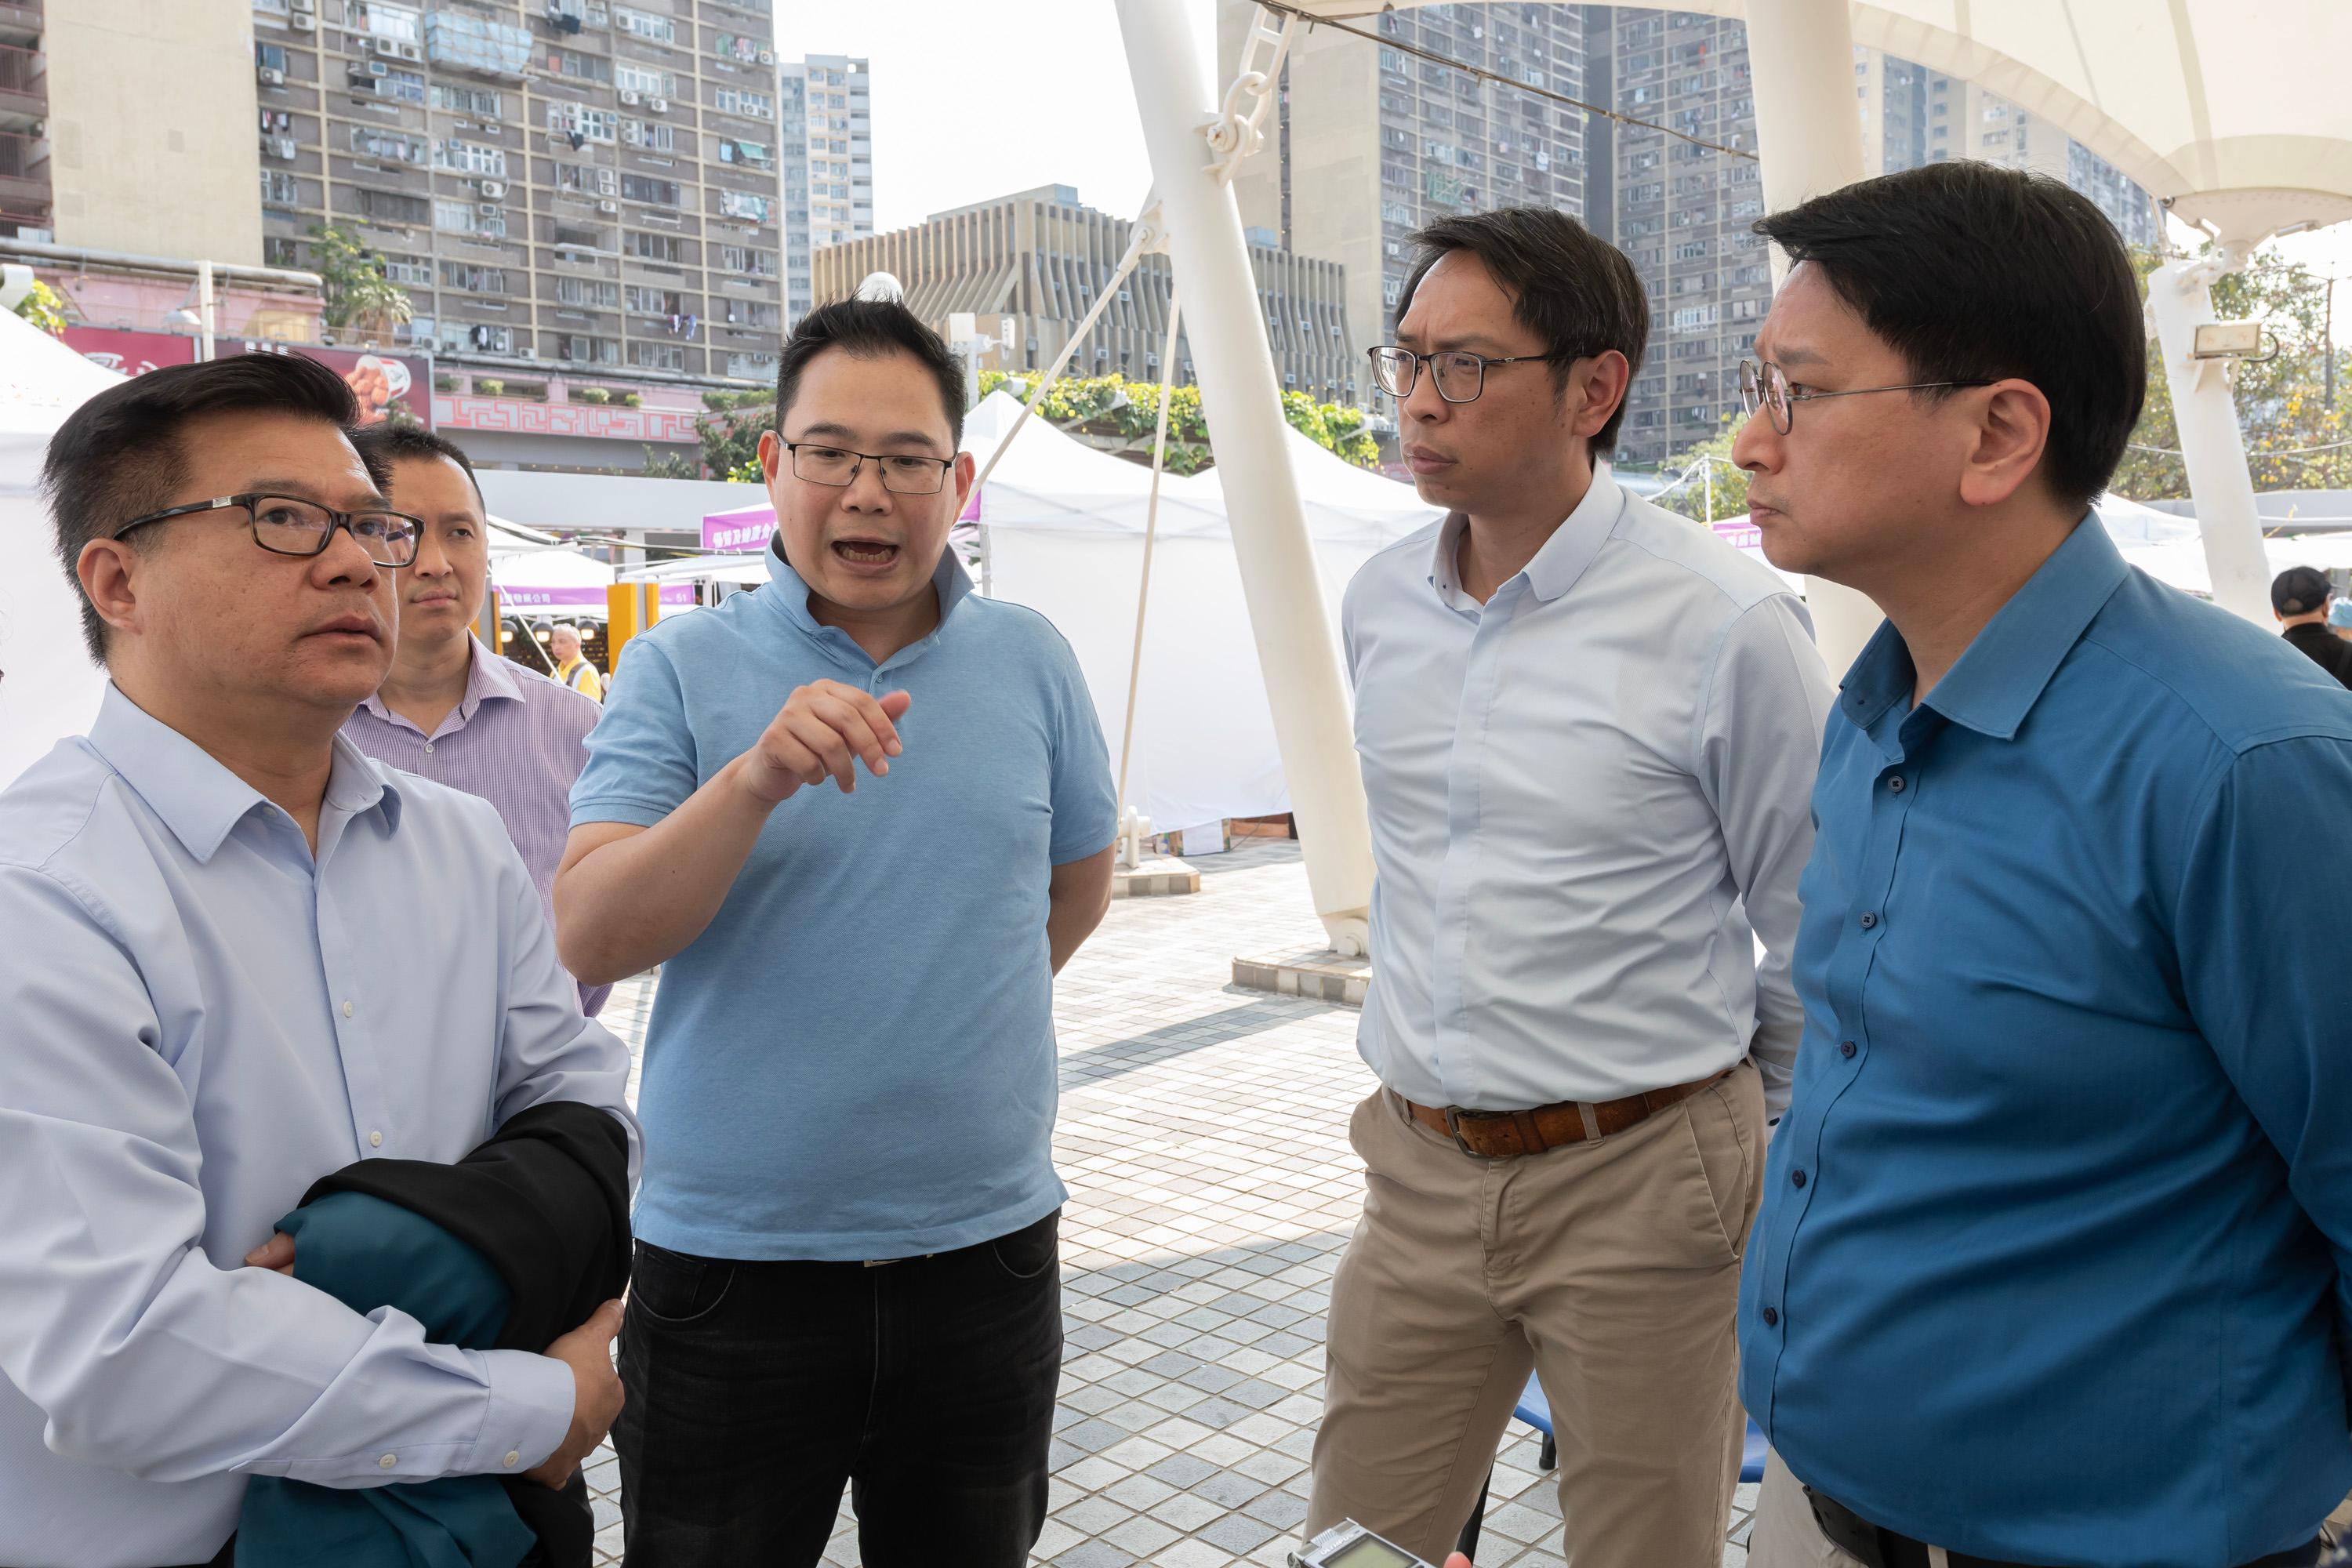 Legislative Council Members conducted a site visit to Tsz Wan Shan area today (March 25) to follow up on issues raised by a deputation relating to a request for provision of Tsz Wan Shan station on the East Kowloon "Crossing-the-Hill" Line. Photo shows members exchanging views with representatives of the Government on the feasibility of constructing a smart and green mass transit system in Tsz Wan Shan area.